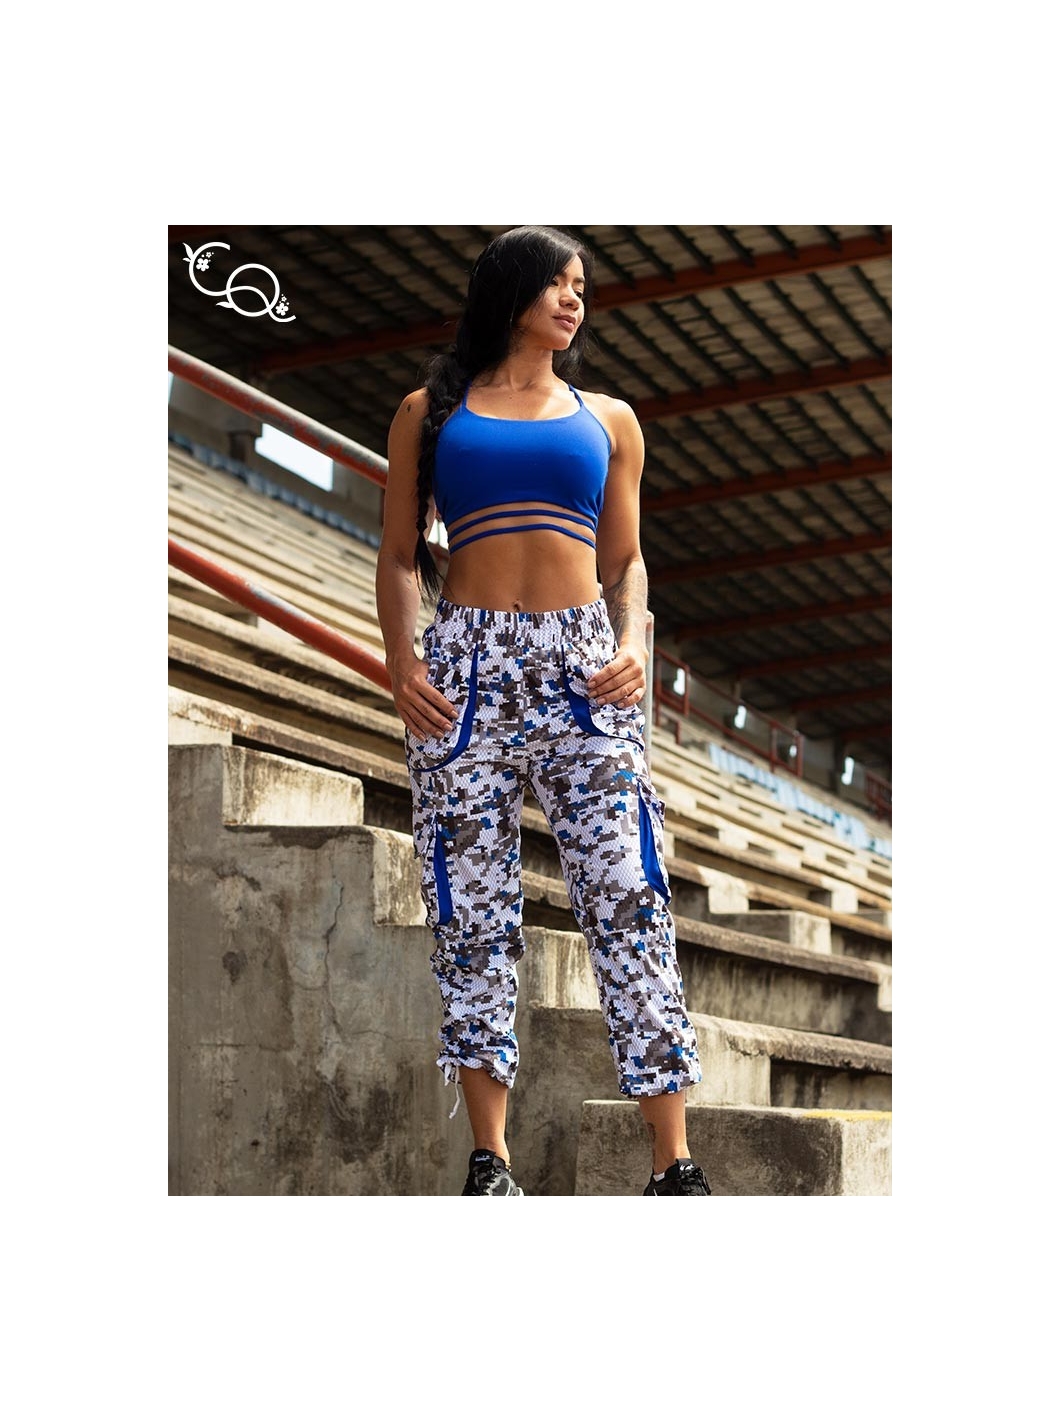 Sport Outfit Women - Comfort Without Interruptions